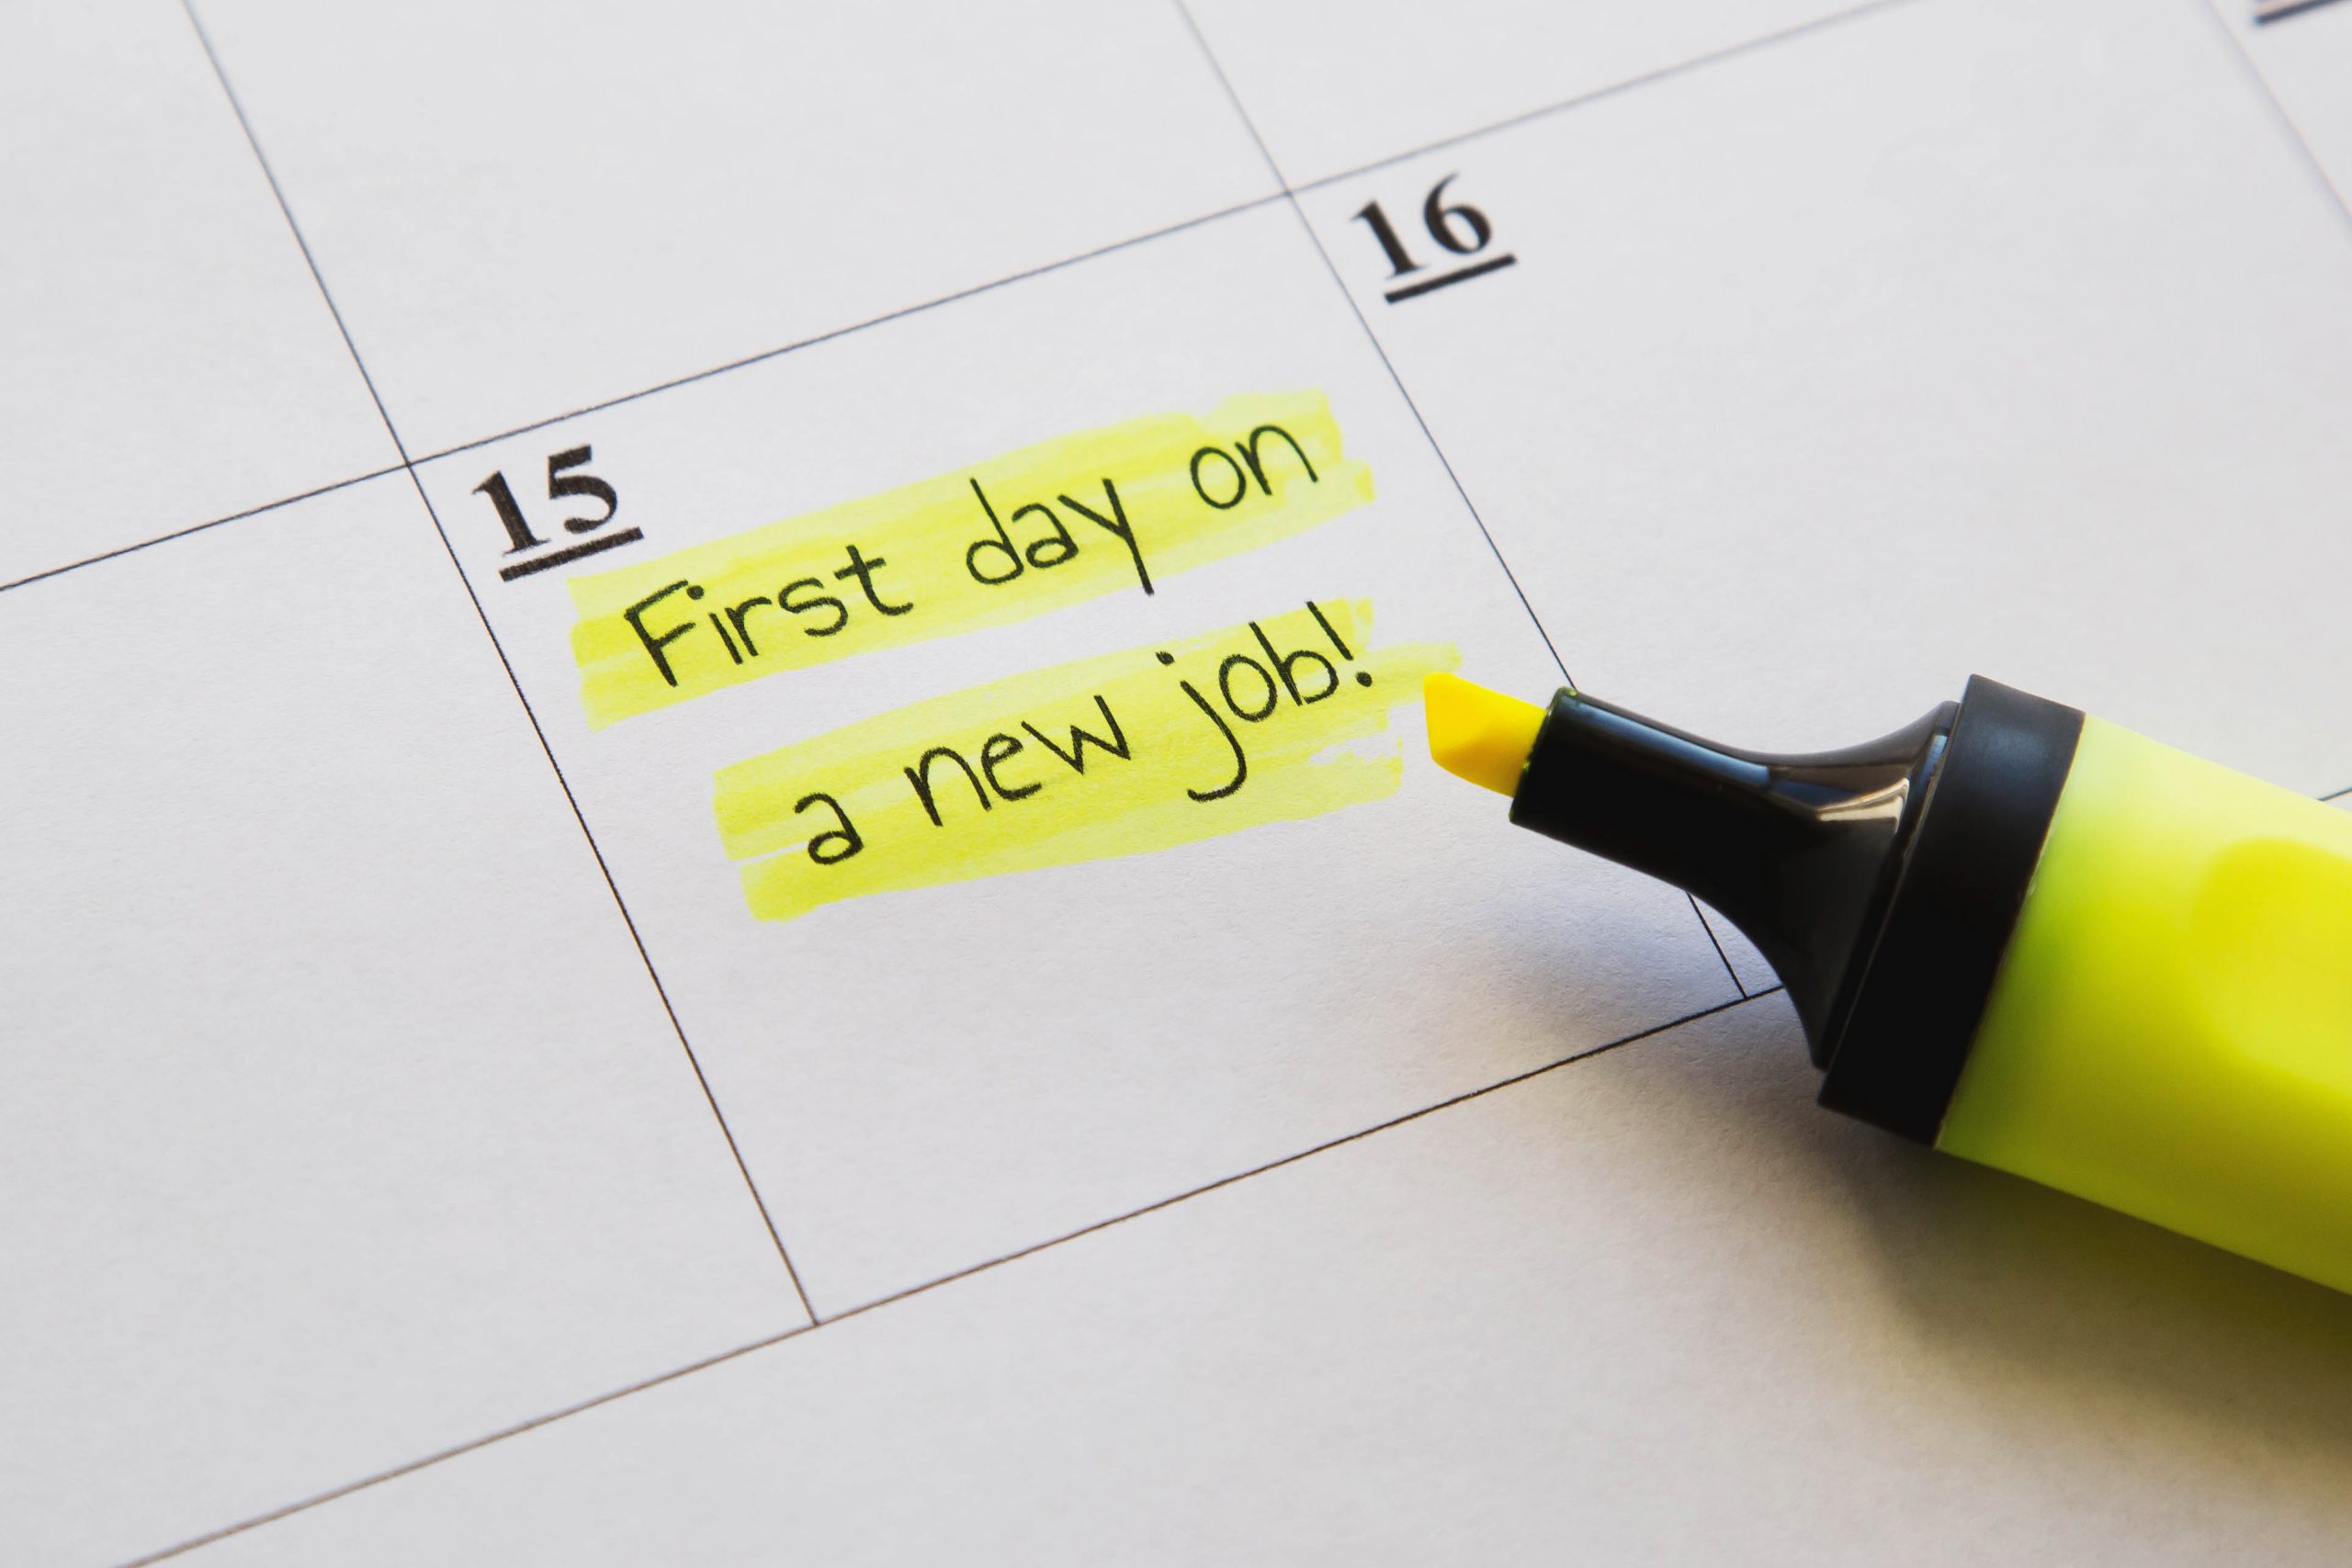 A calendar is marked with the wording "First day on a new job!"